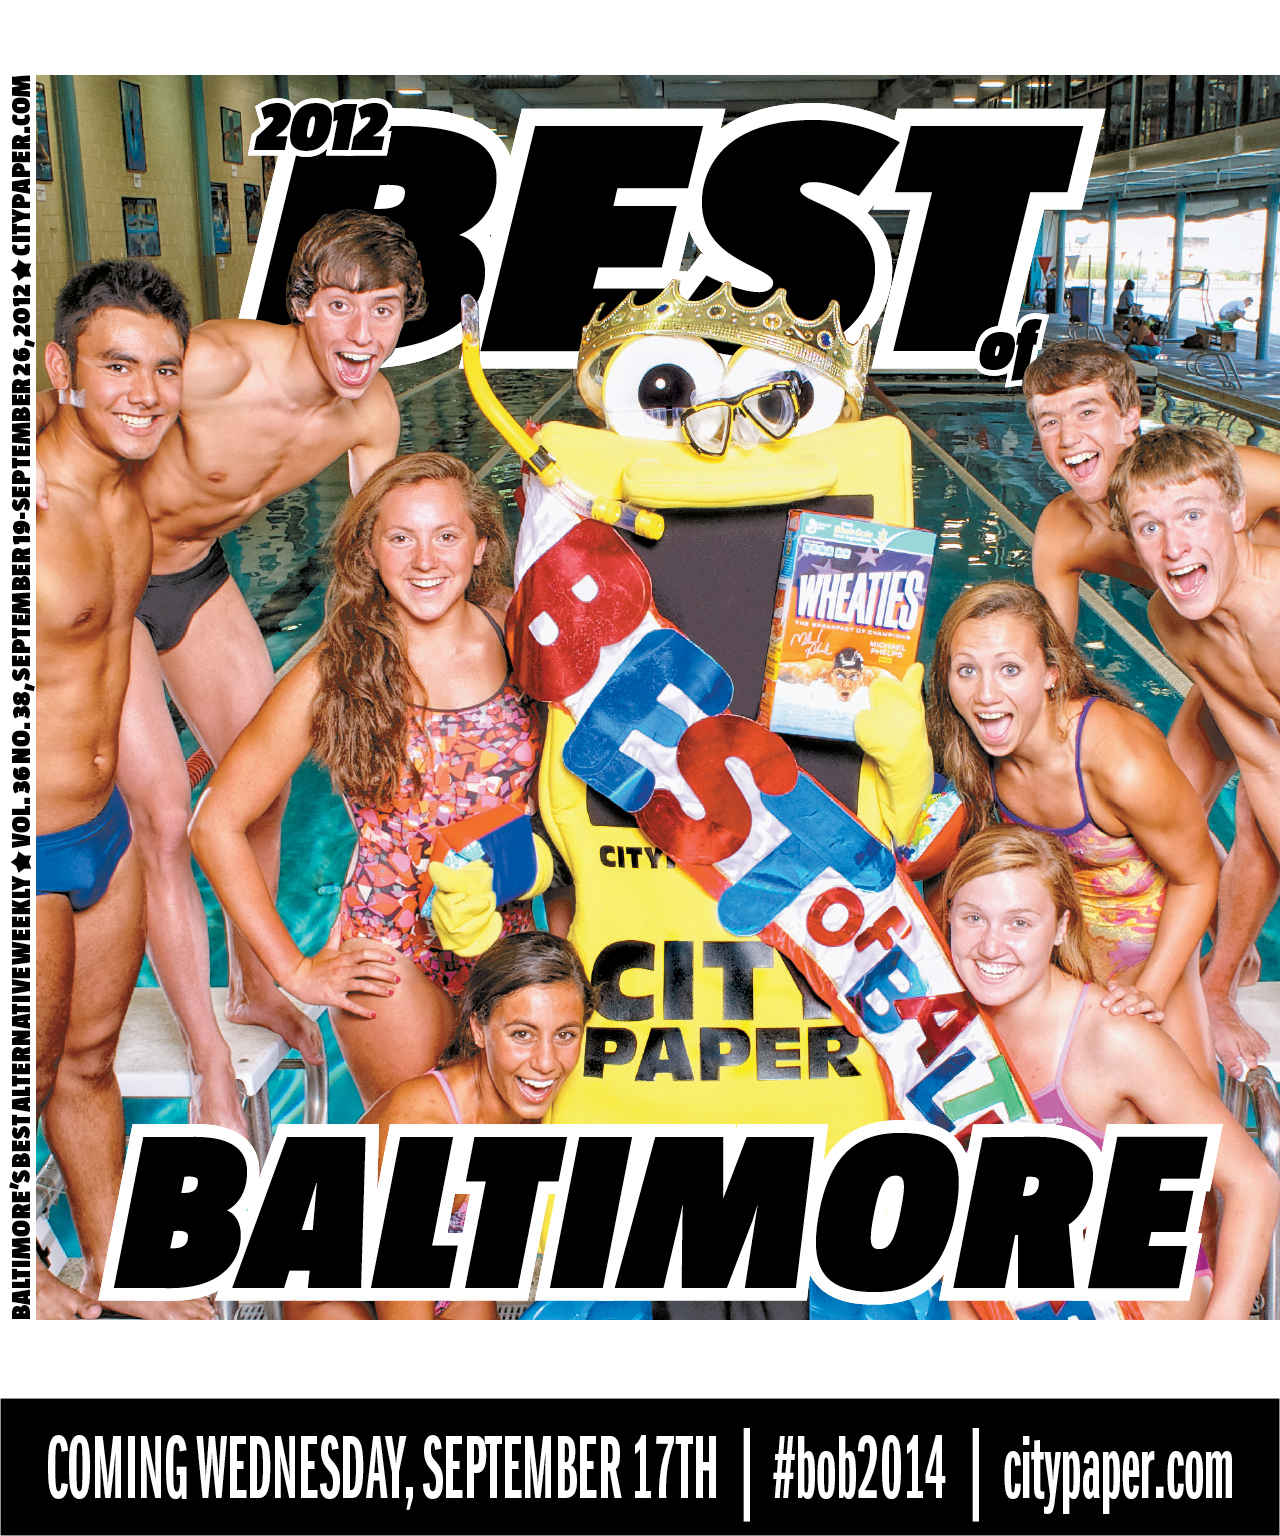 CITYPAPER_covers_2012